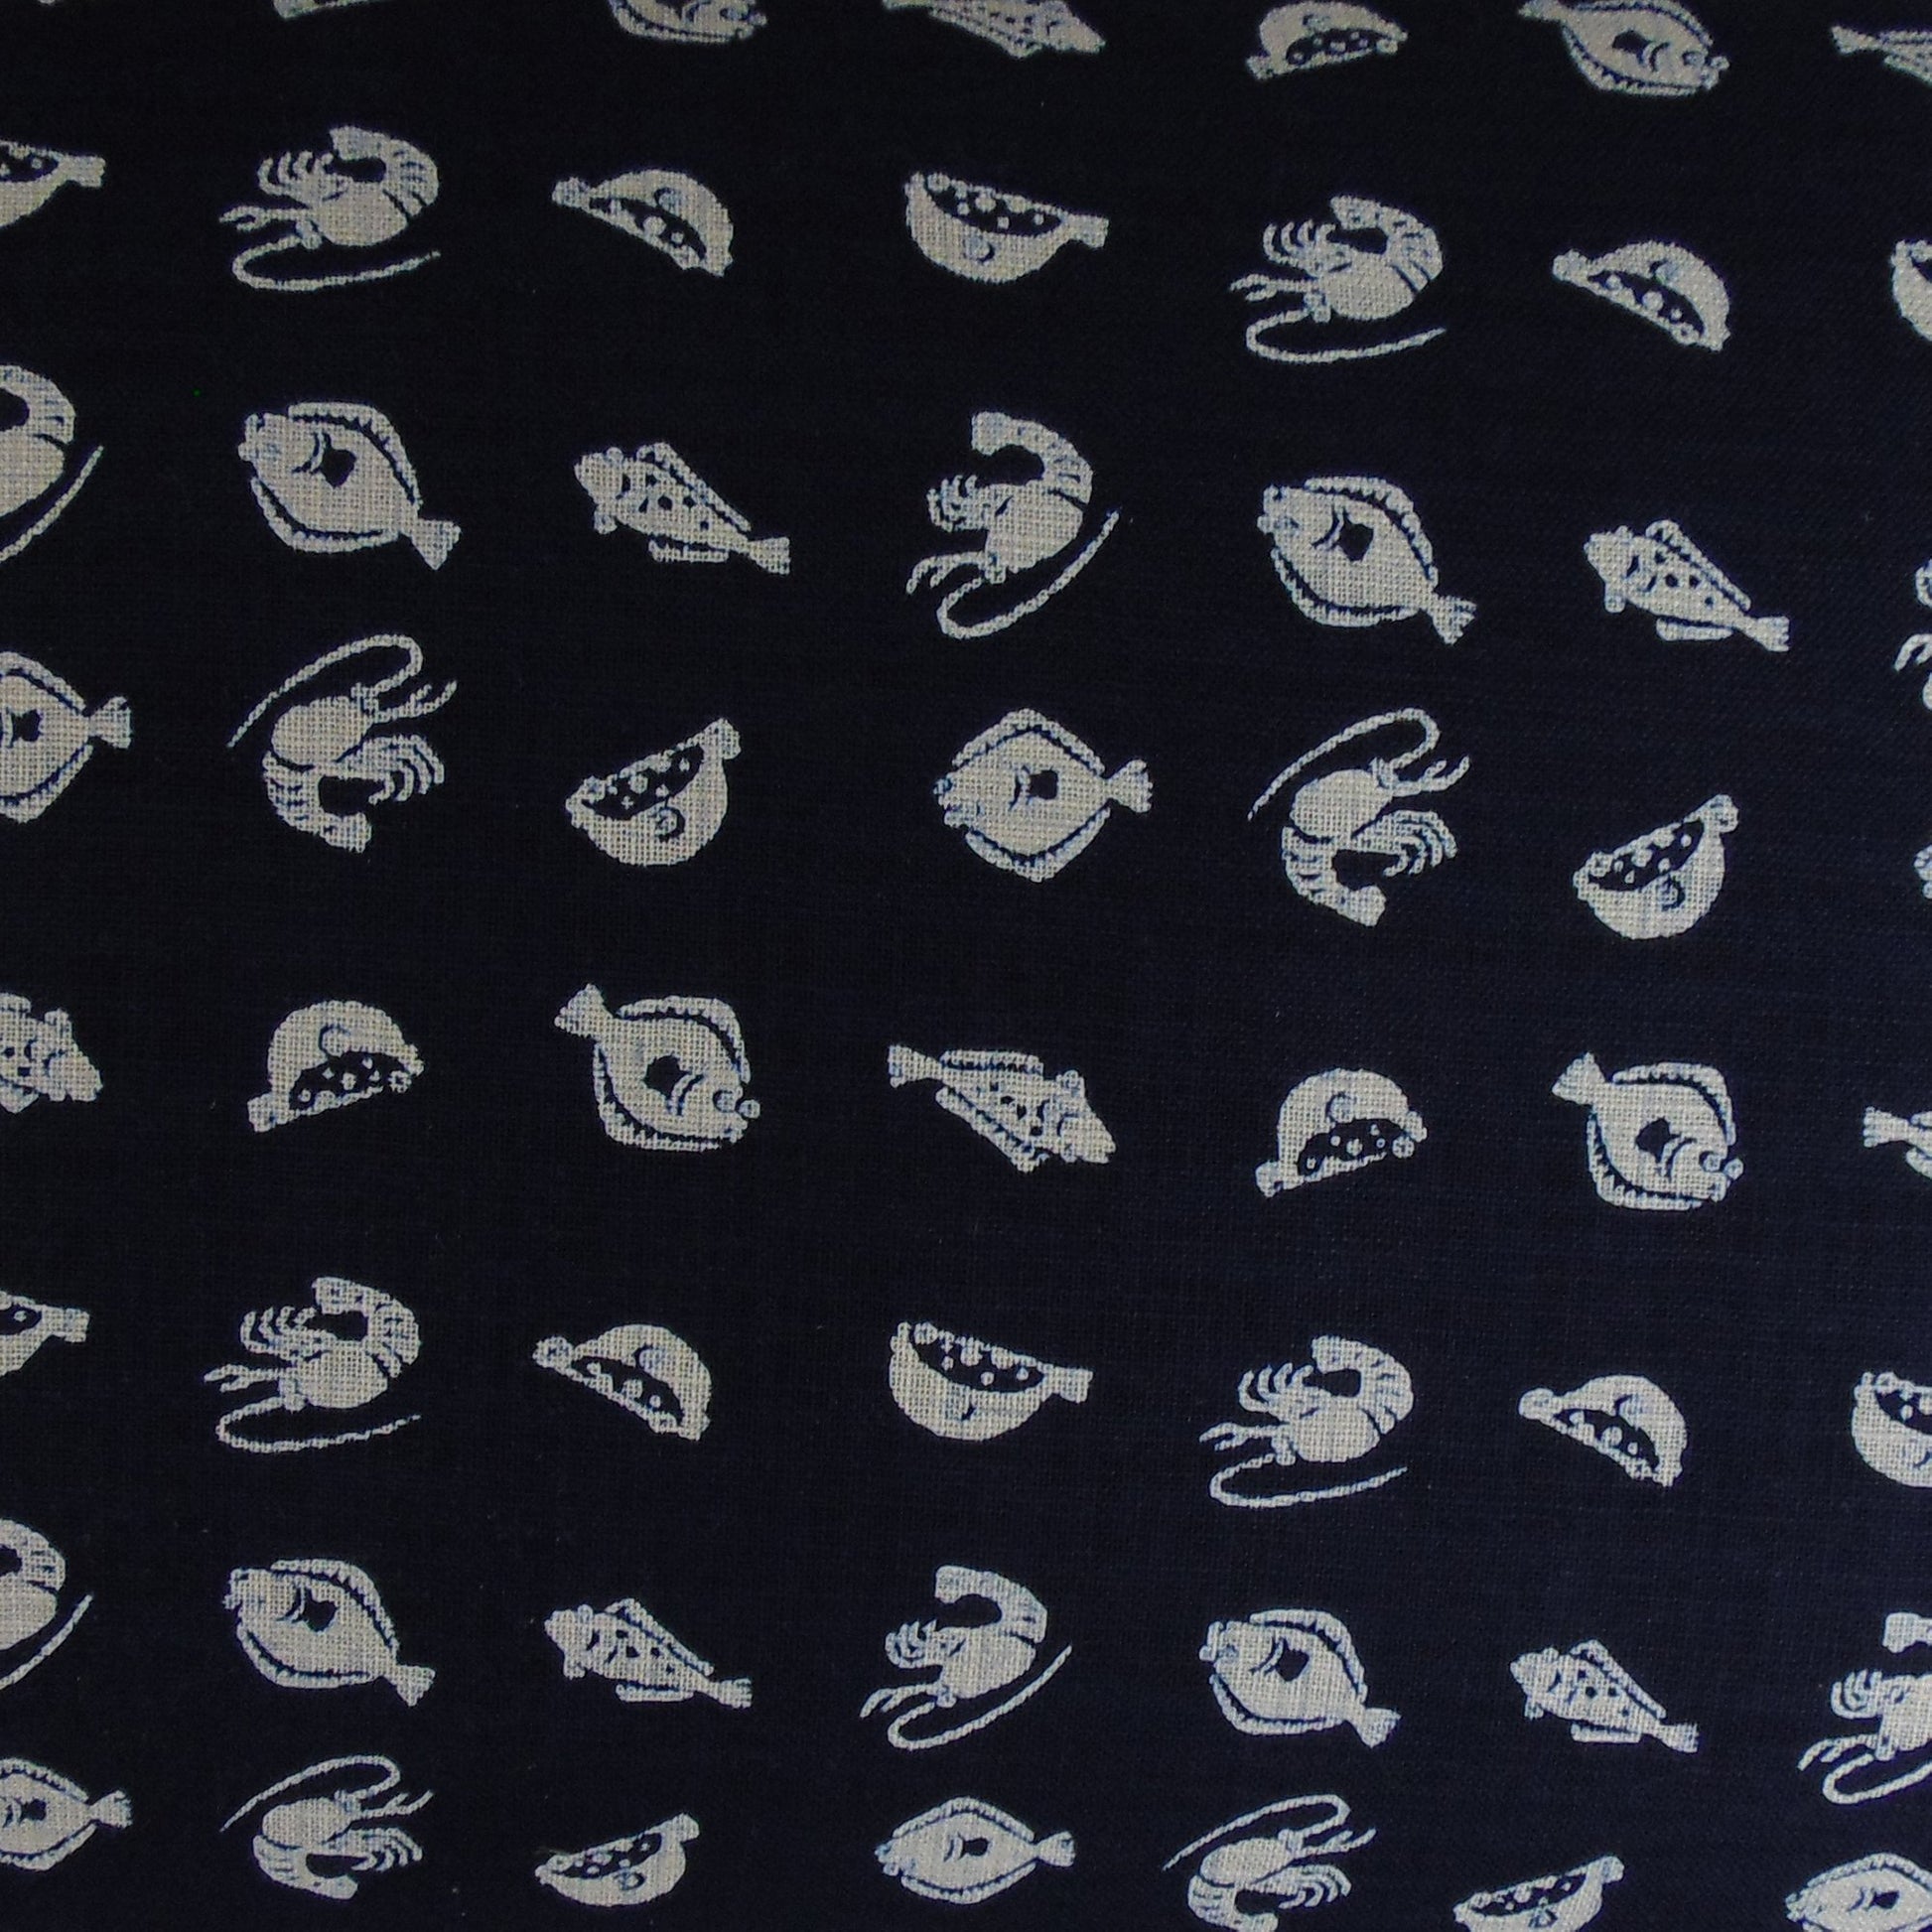 Imported Japanese Fabric - Marin Navy_Fabric_Imported from Japan_100% Cotton_Japanese Sleep System